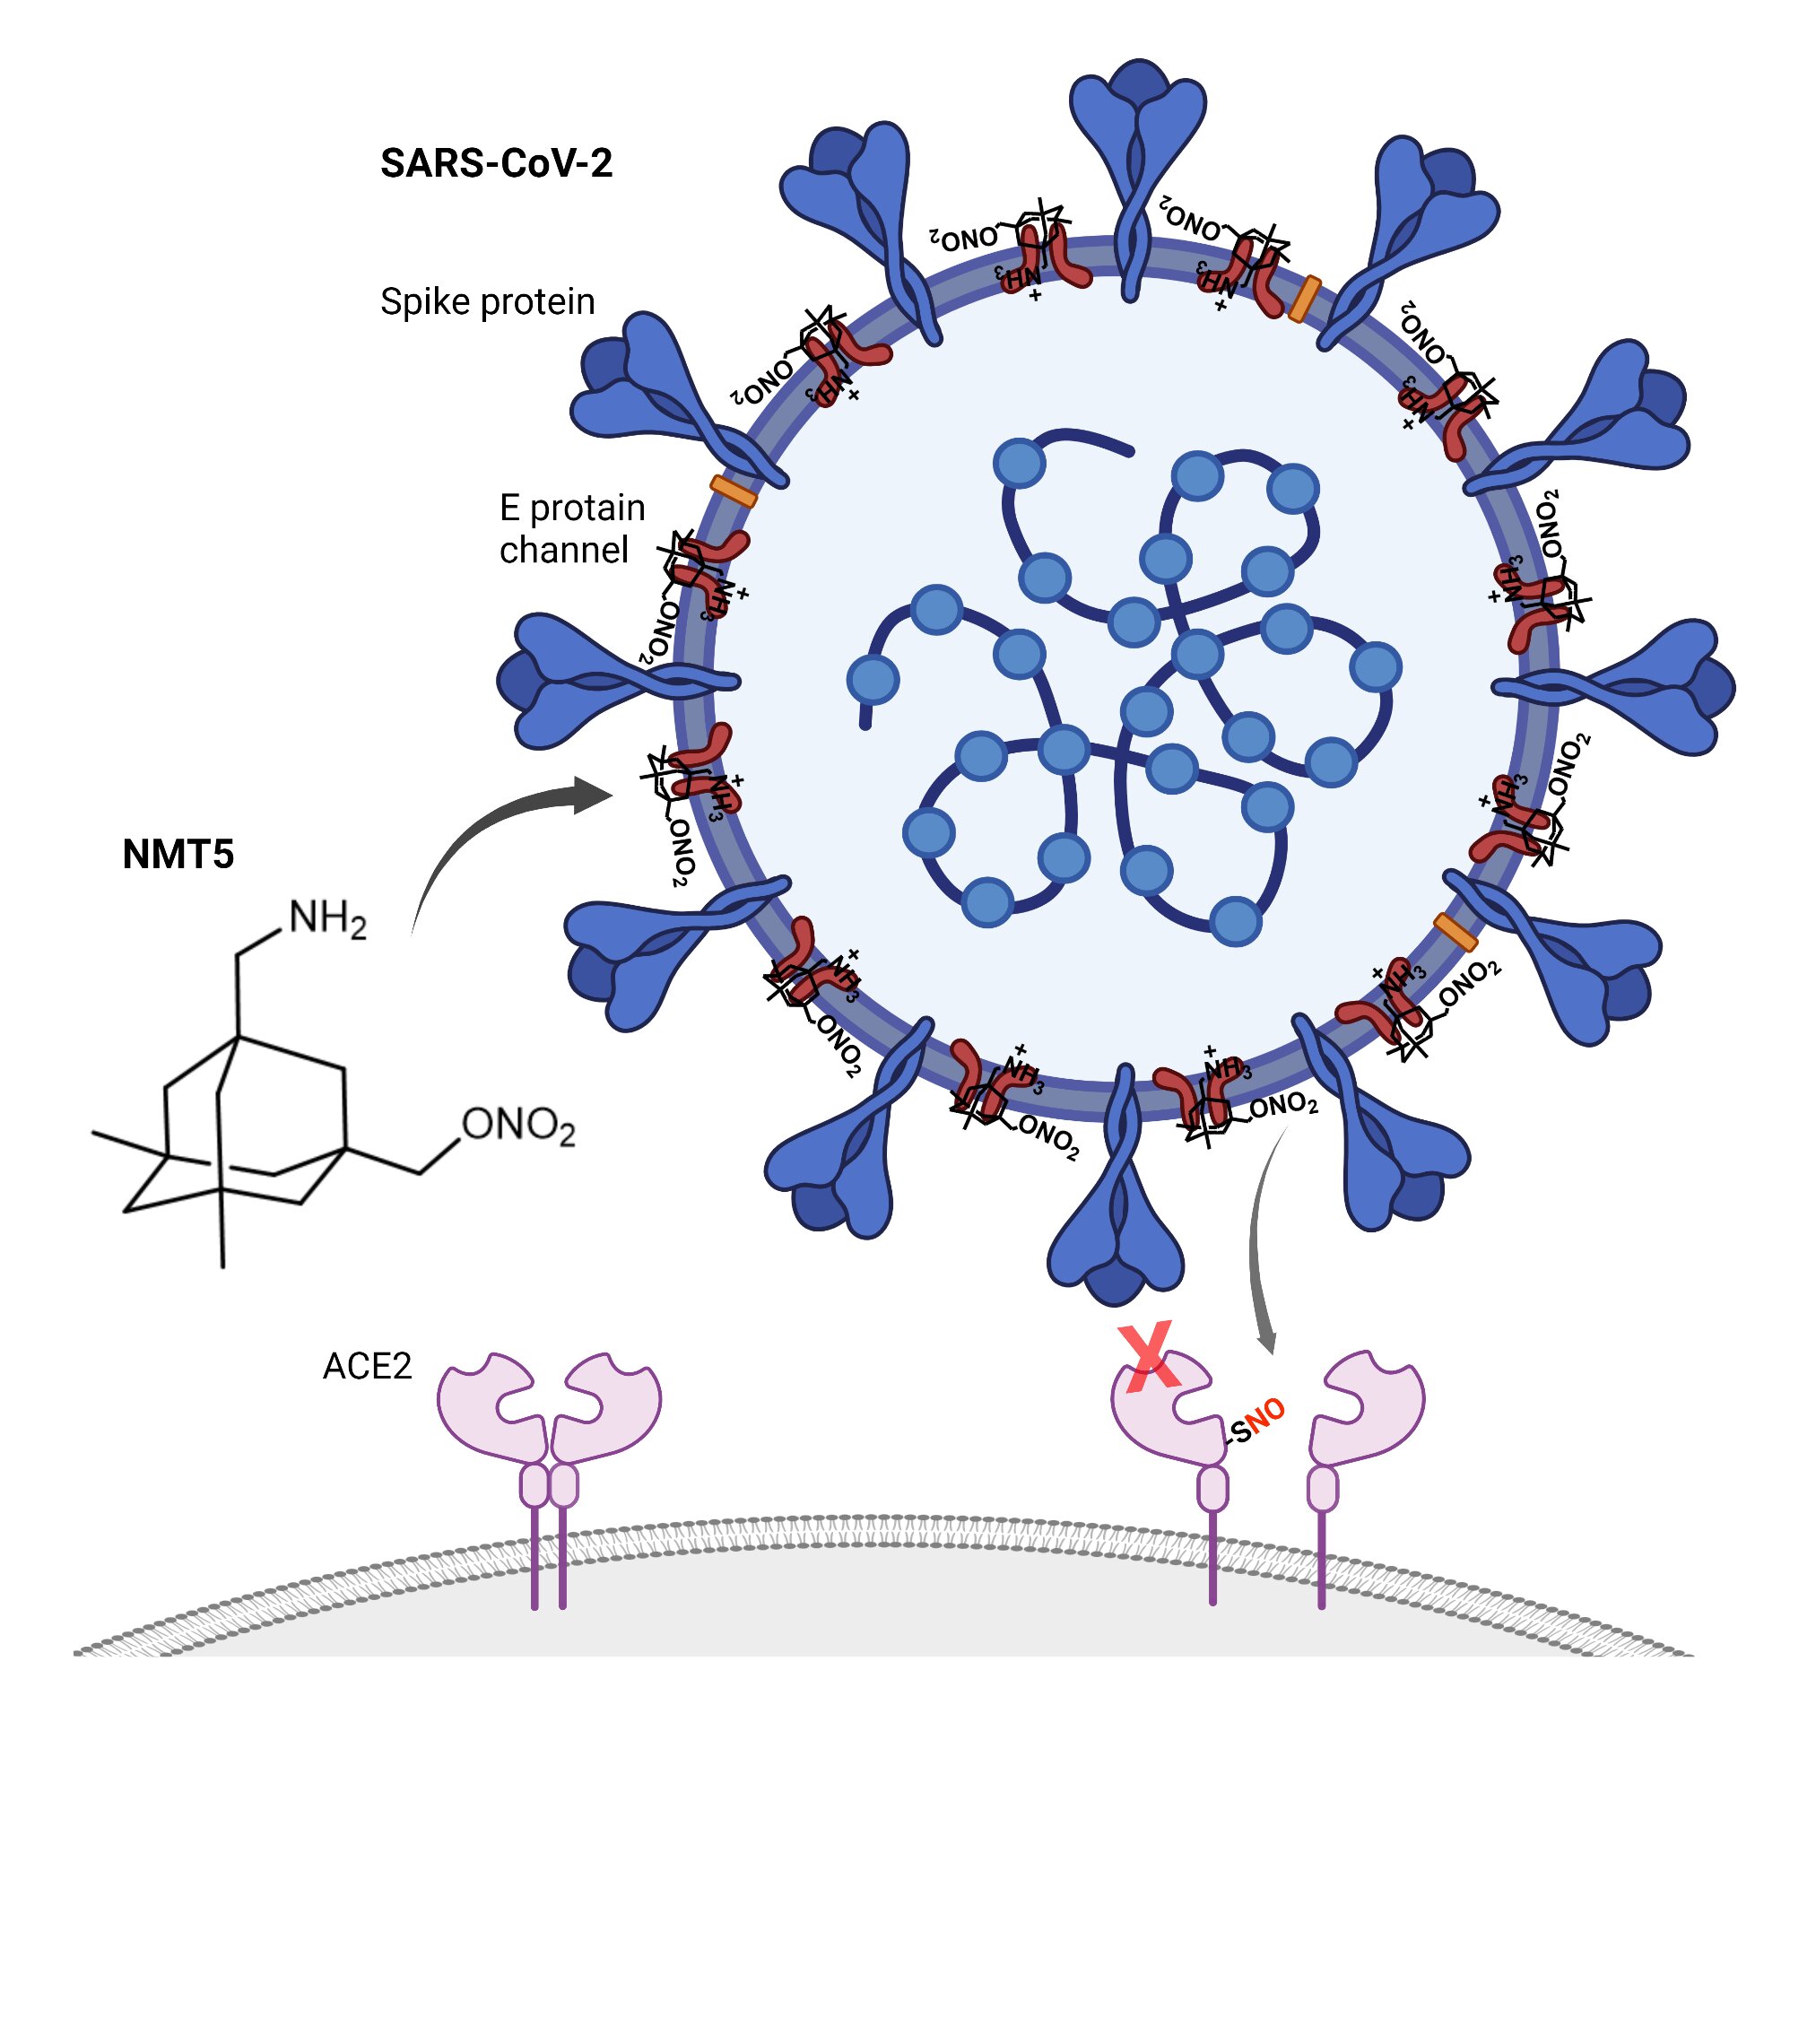 New drug has potential to turn SARS-CoV-2 virus against itself